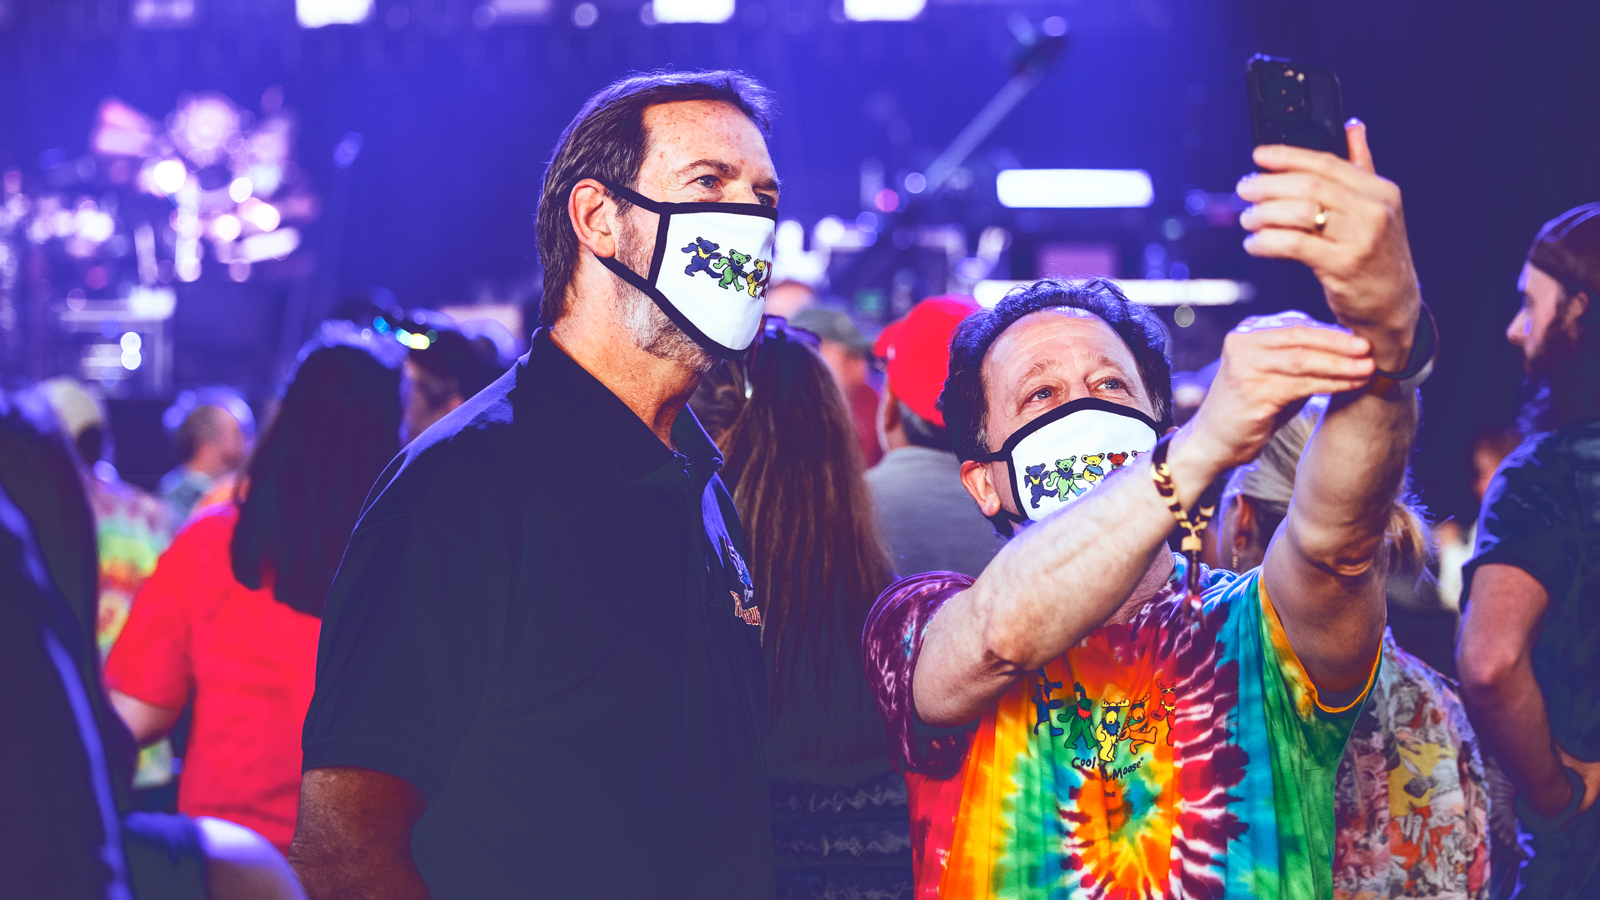 Two men wearing face masks with colorful dancing bears on them pose for a selfie at a concert.